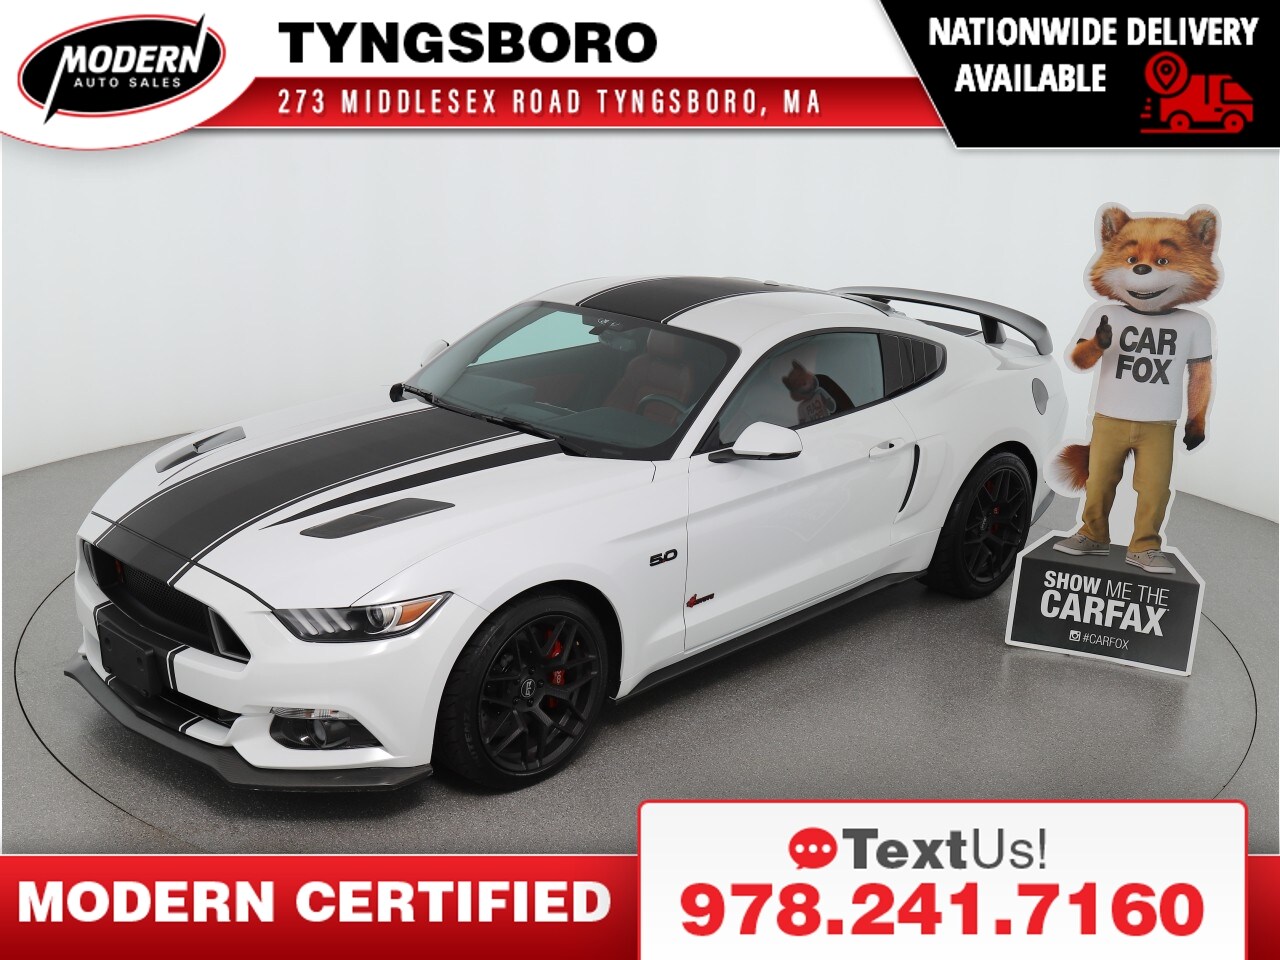 Used Ford Mustang Tyngsborough Ma